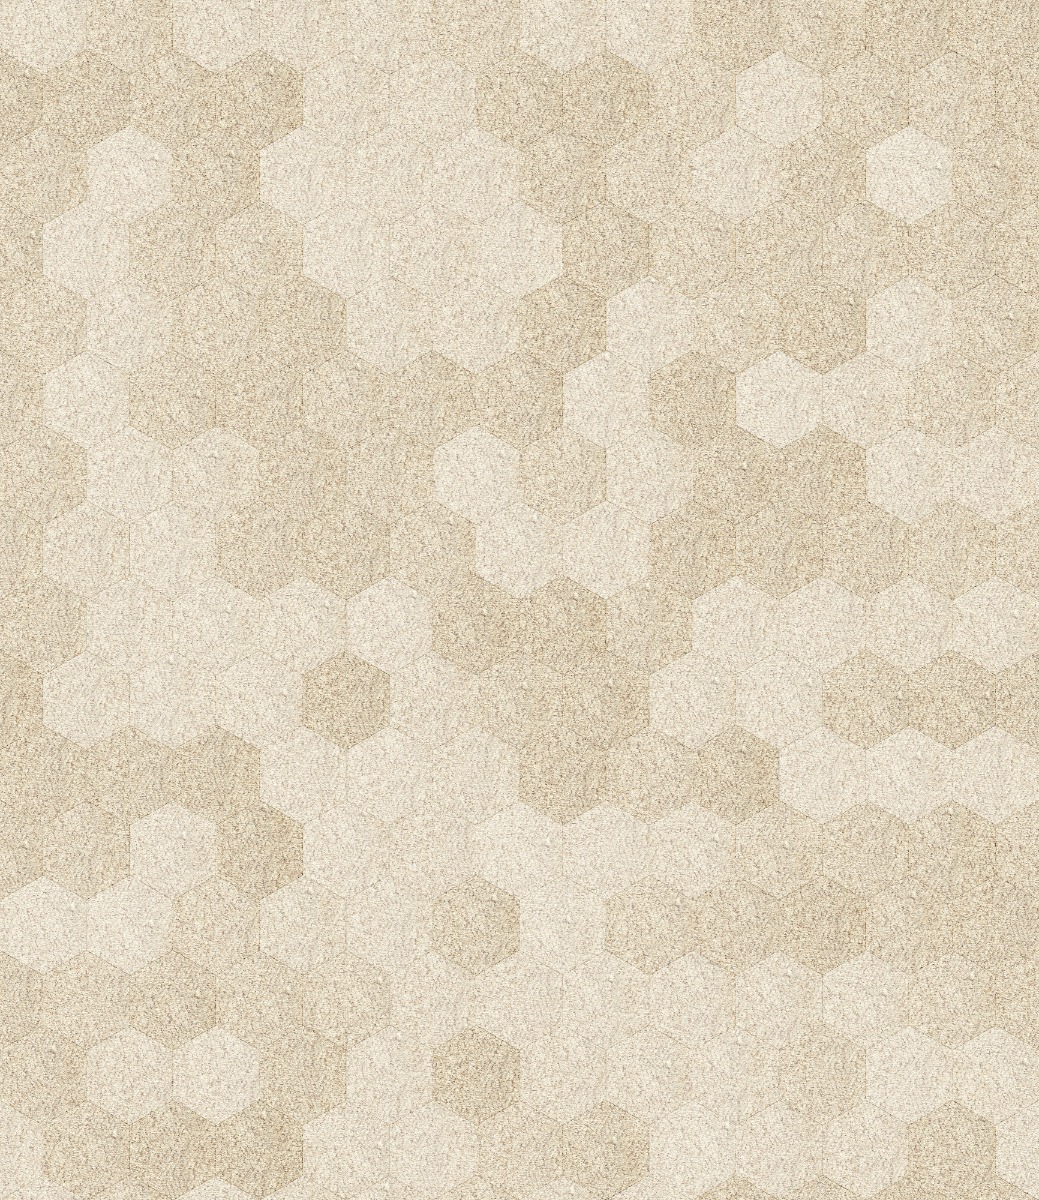 A seamless carpet texture with oatmeal loop pile carpet units arranged in a Hexagonal pattern